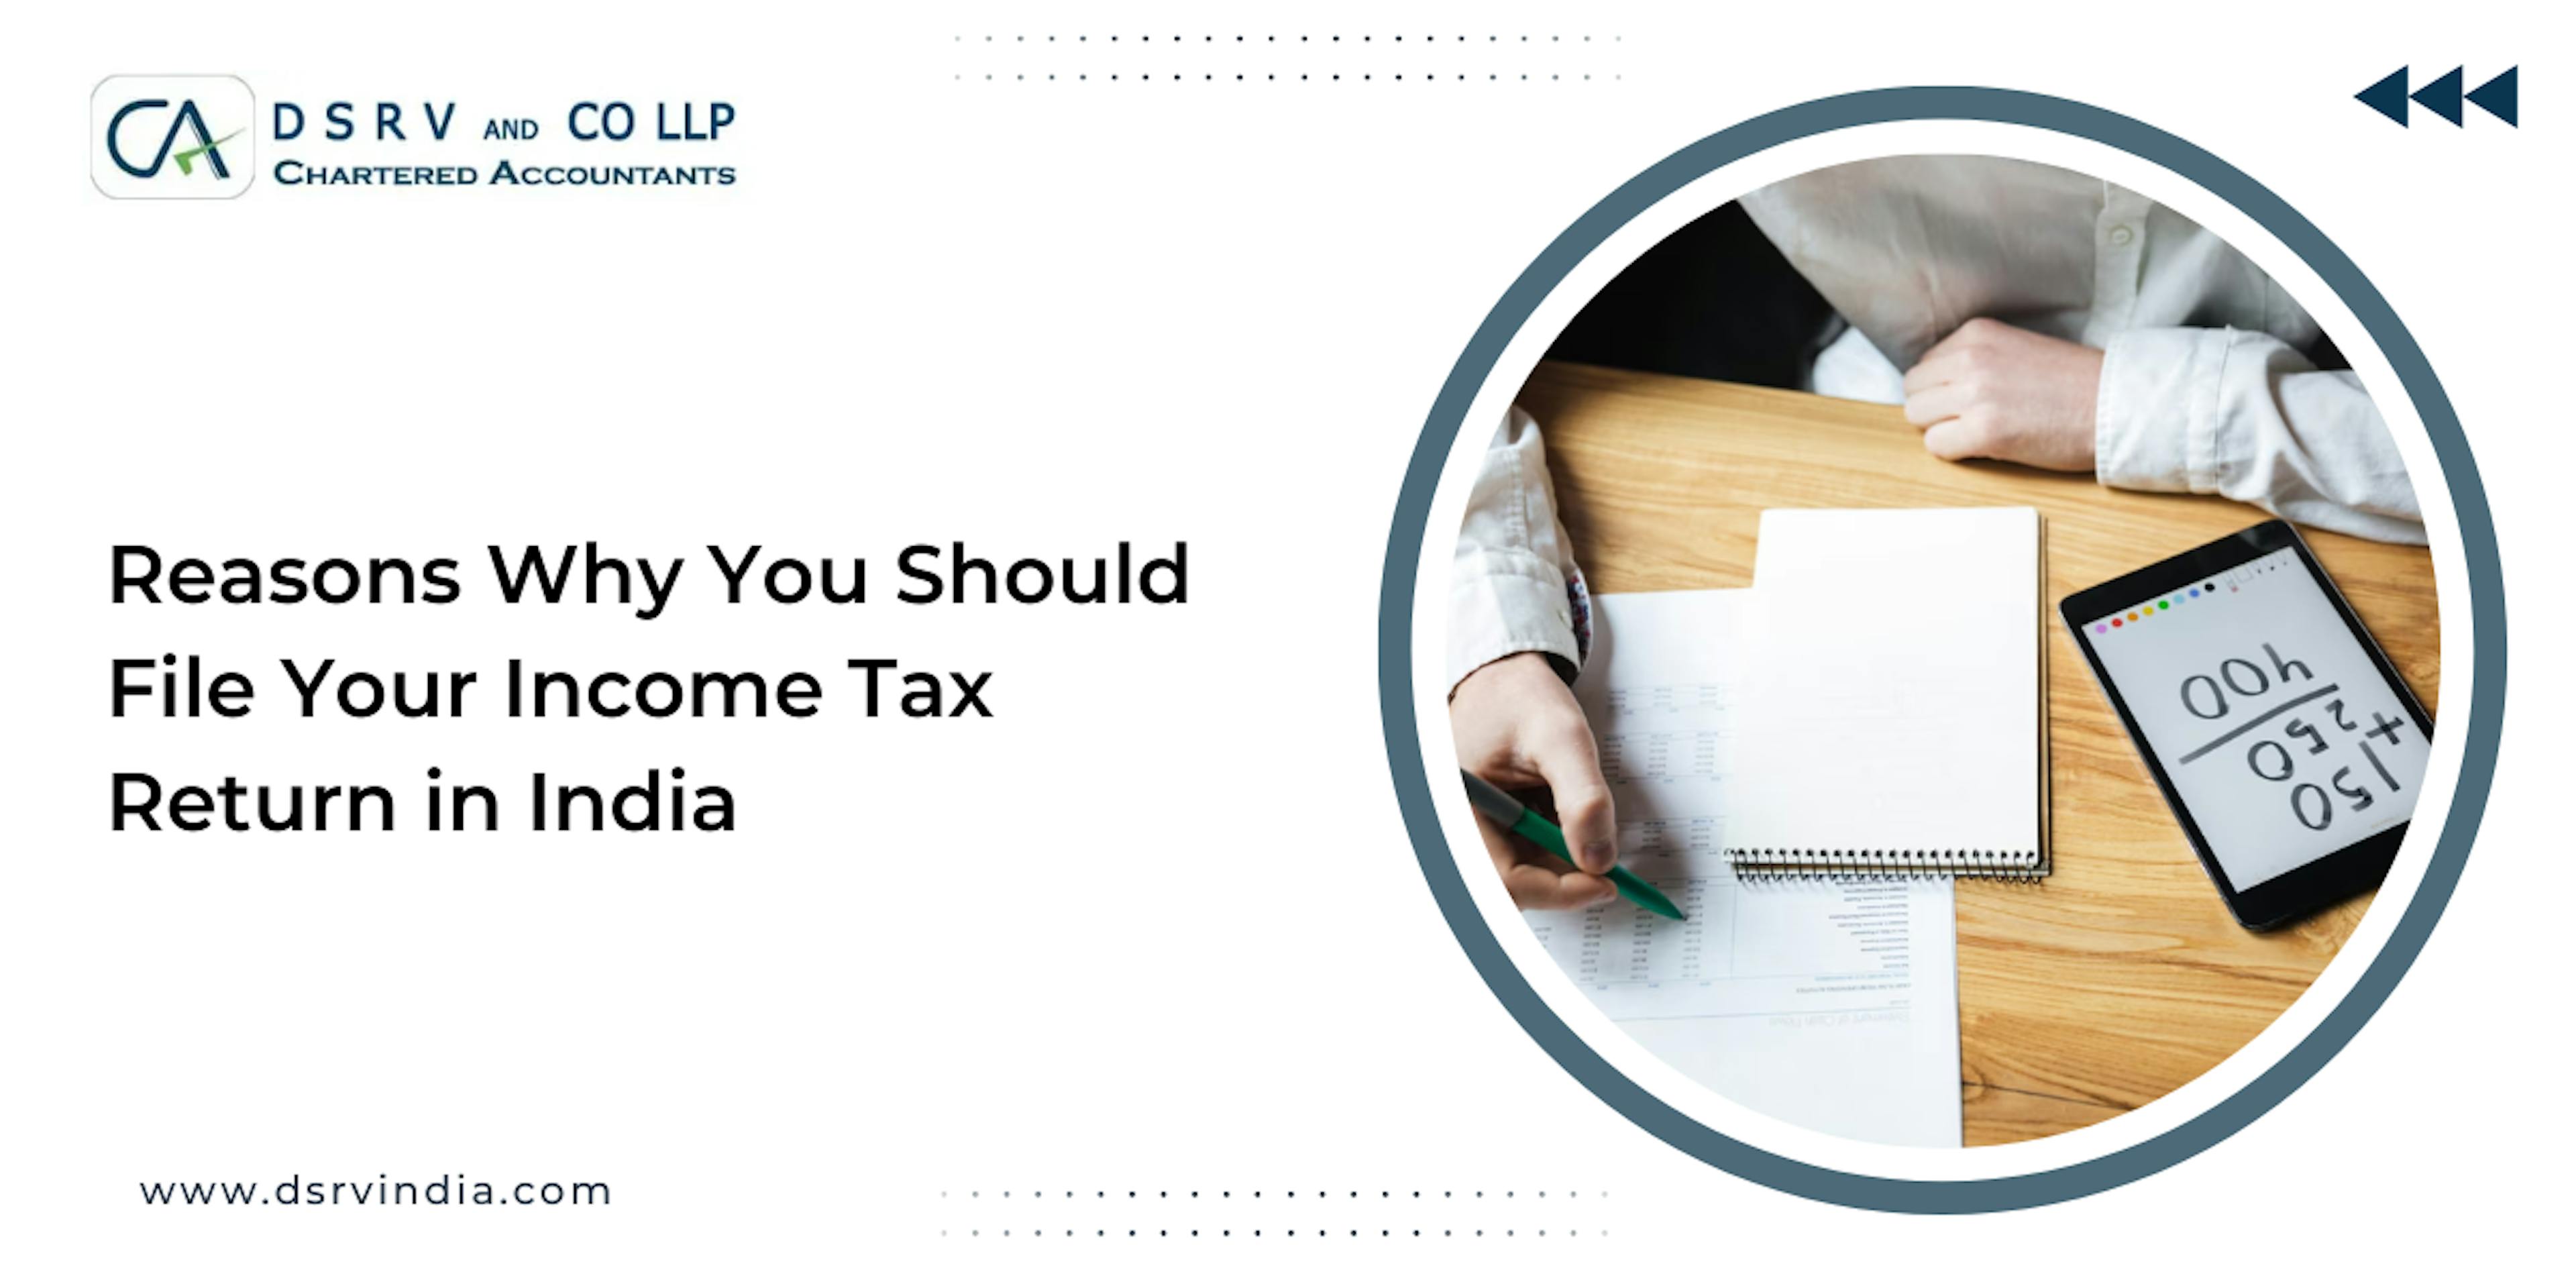 Reasons Why You Should File Your Income Tax Return in India: Blog Poster